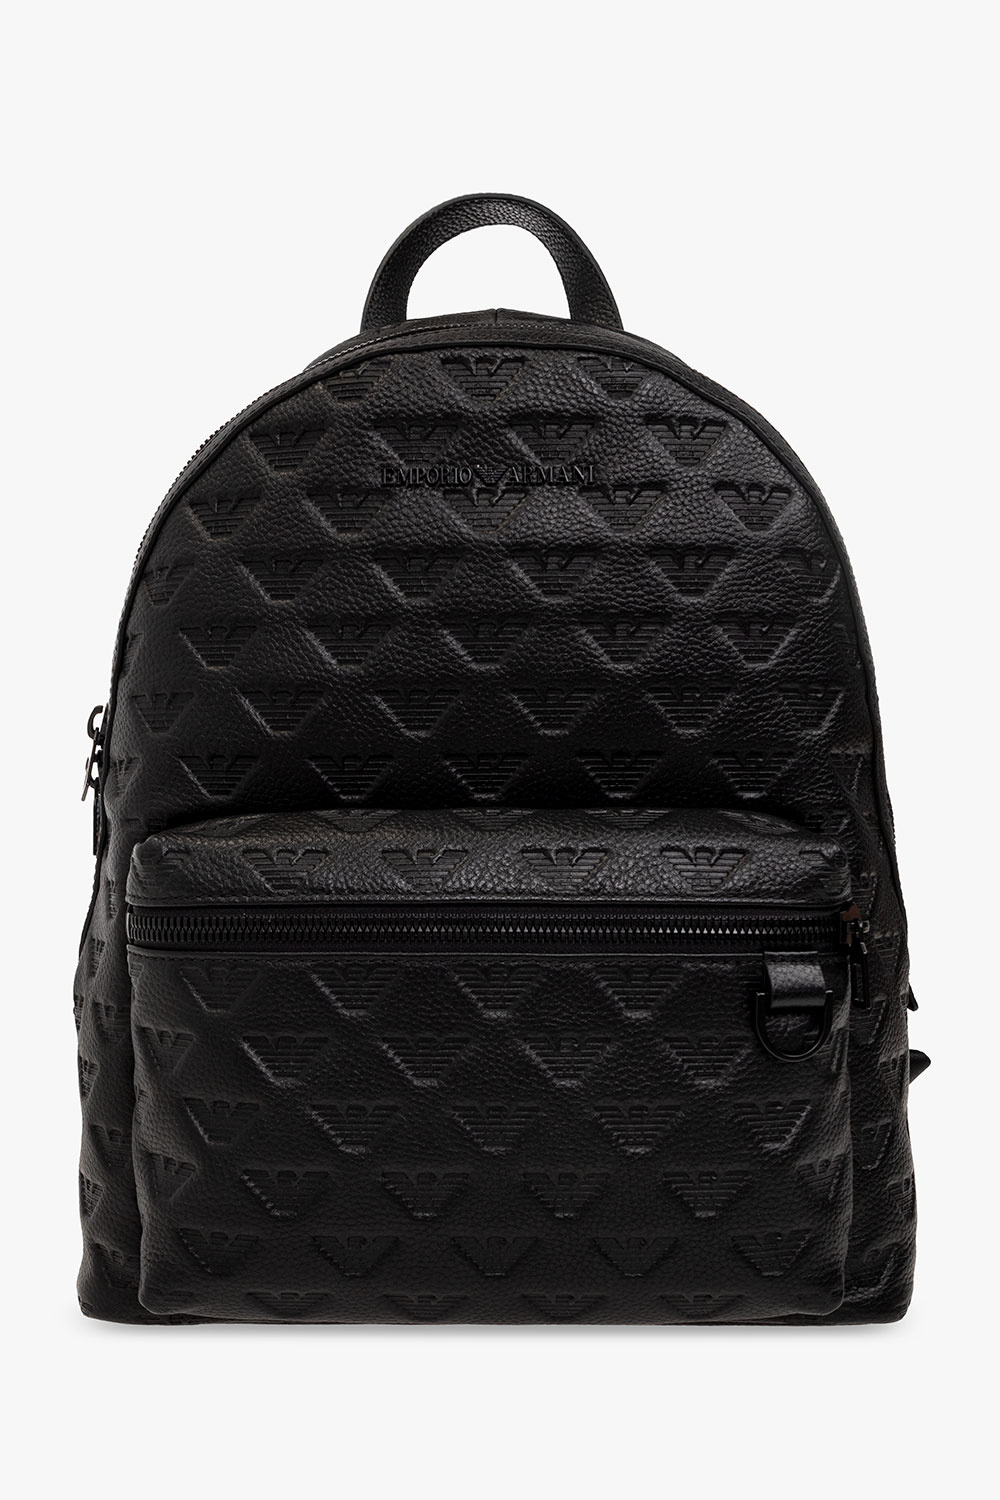 Emporio Armani Embossed leather backpack